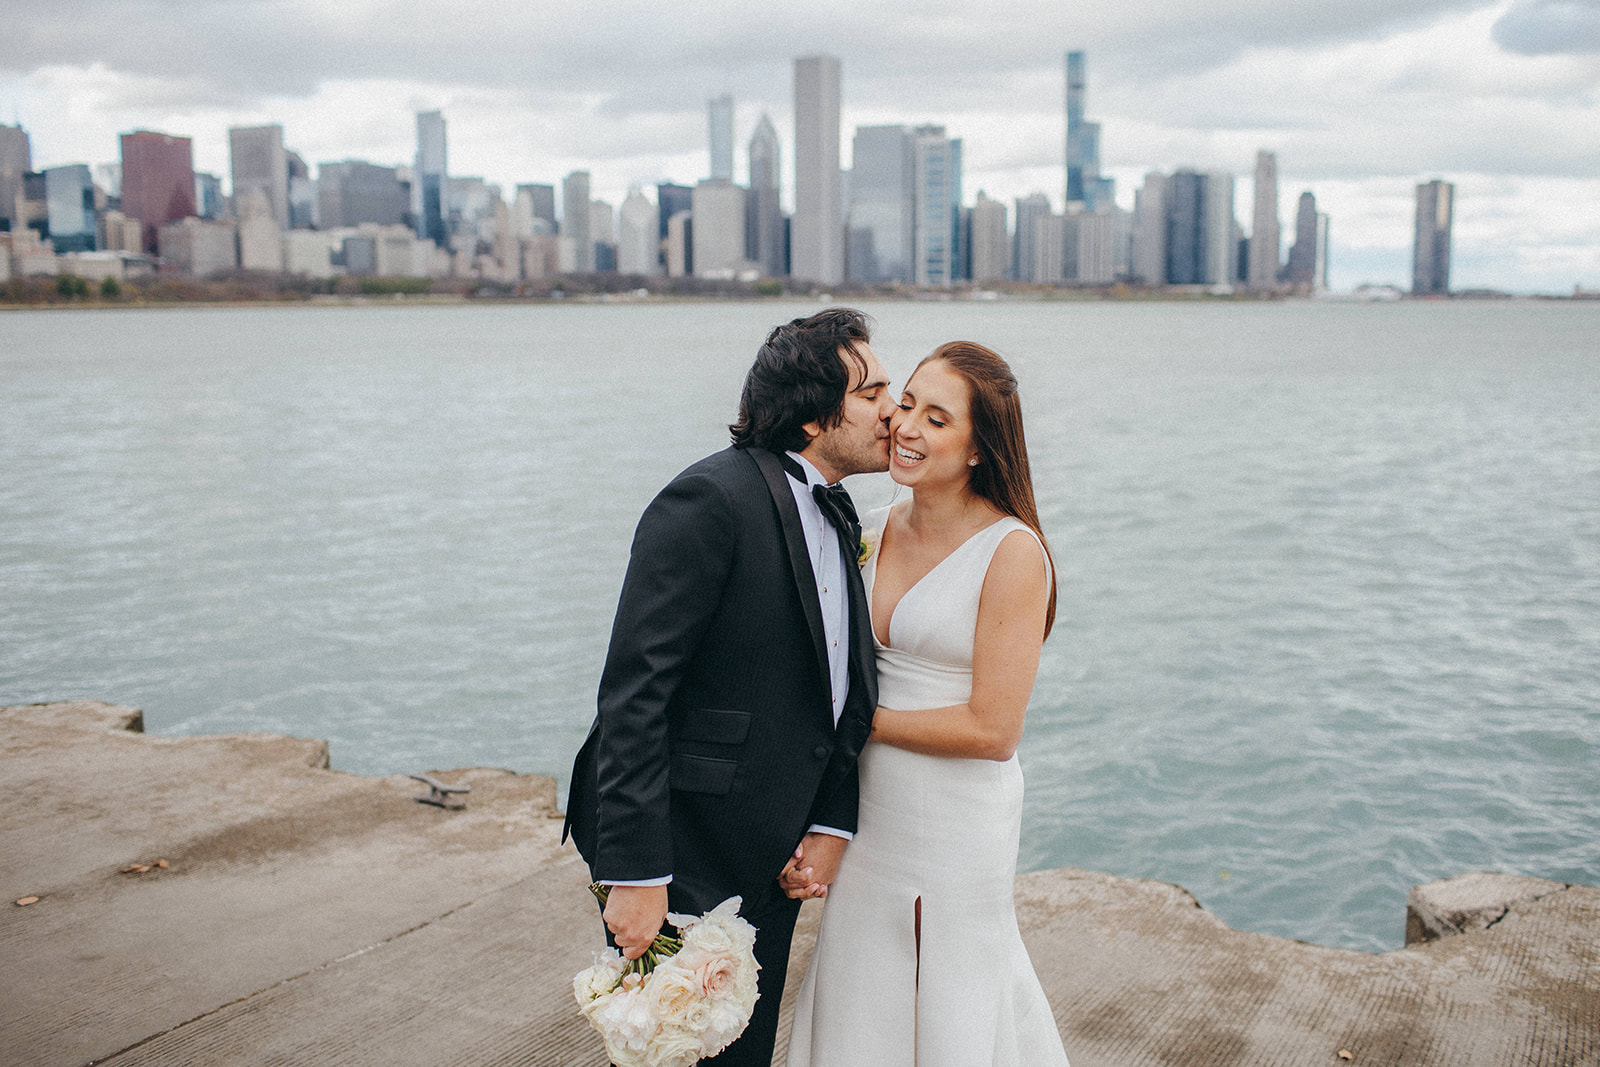 Black tie wedding portraits on Lake Michigan in front of the Chicago Skyline